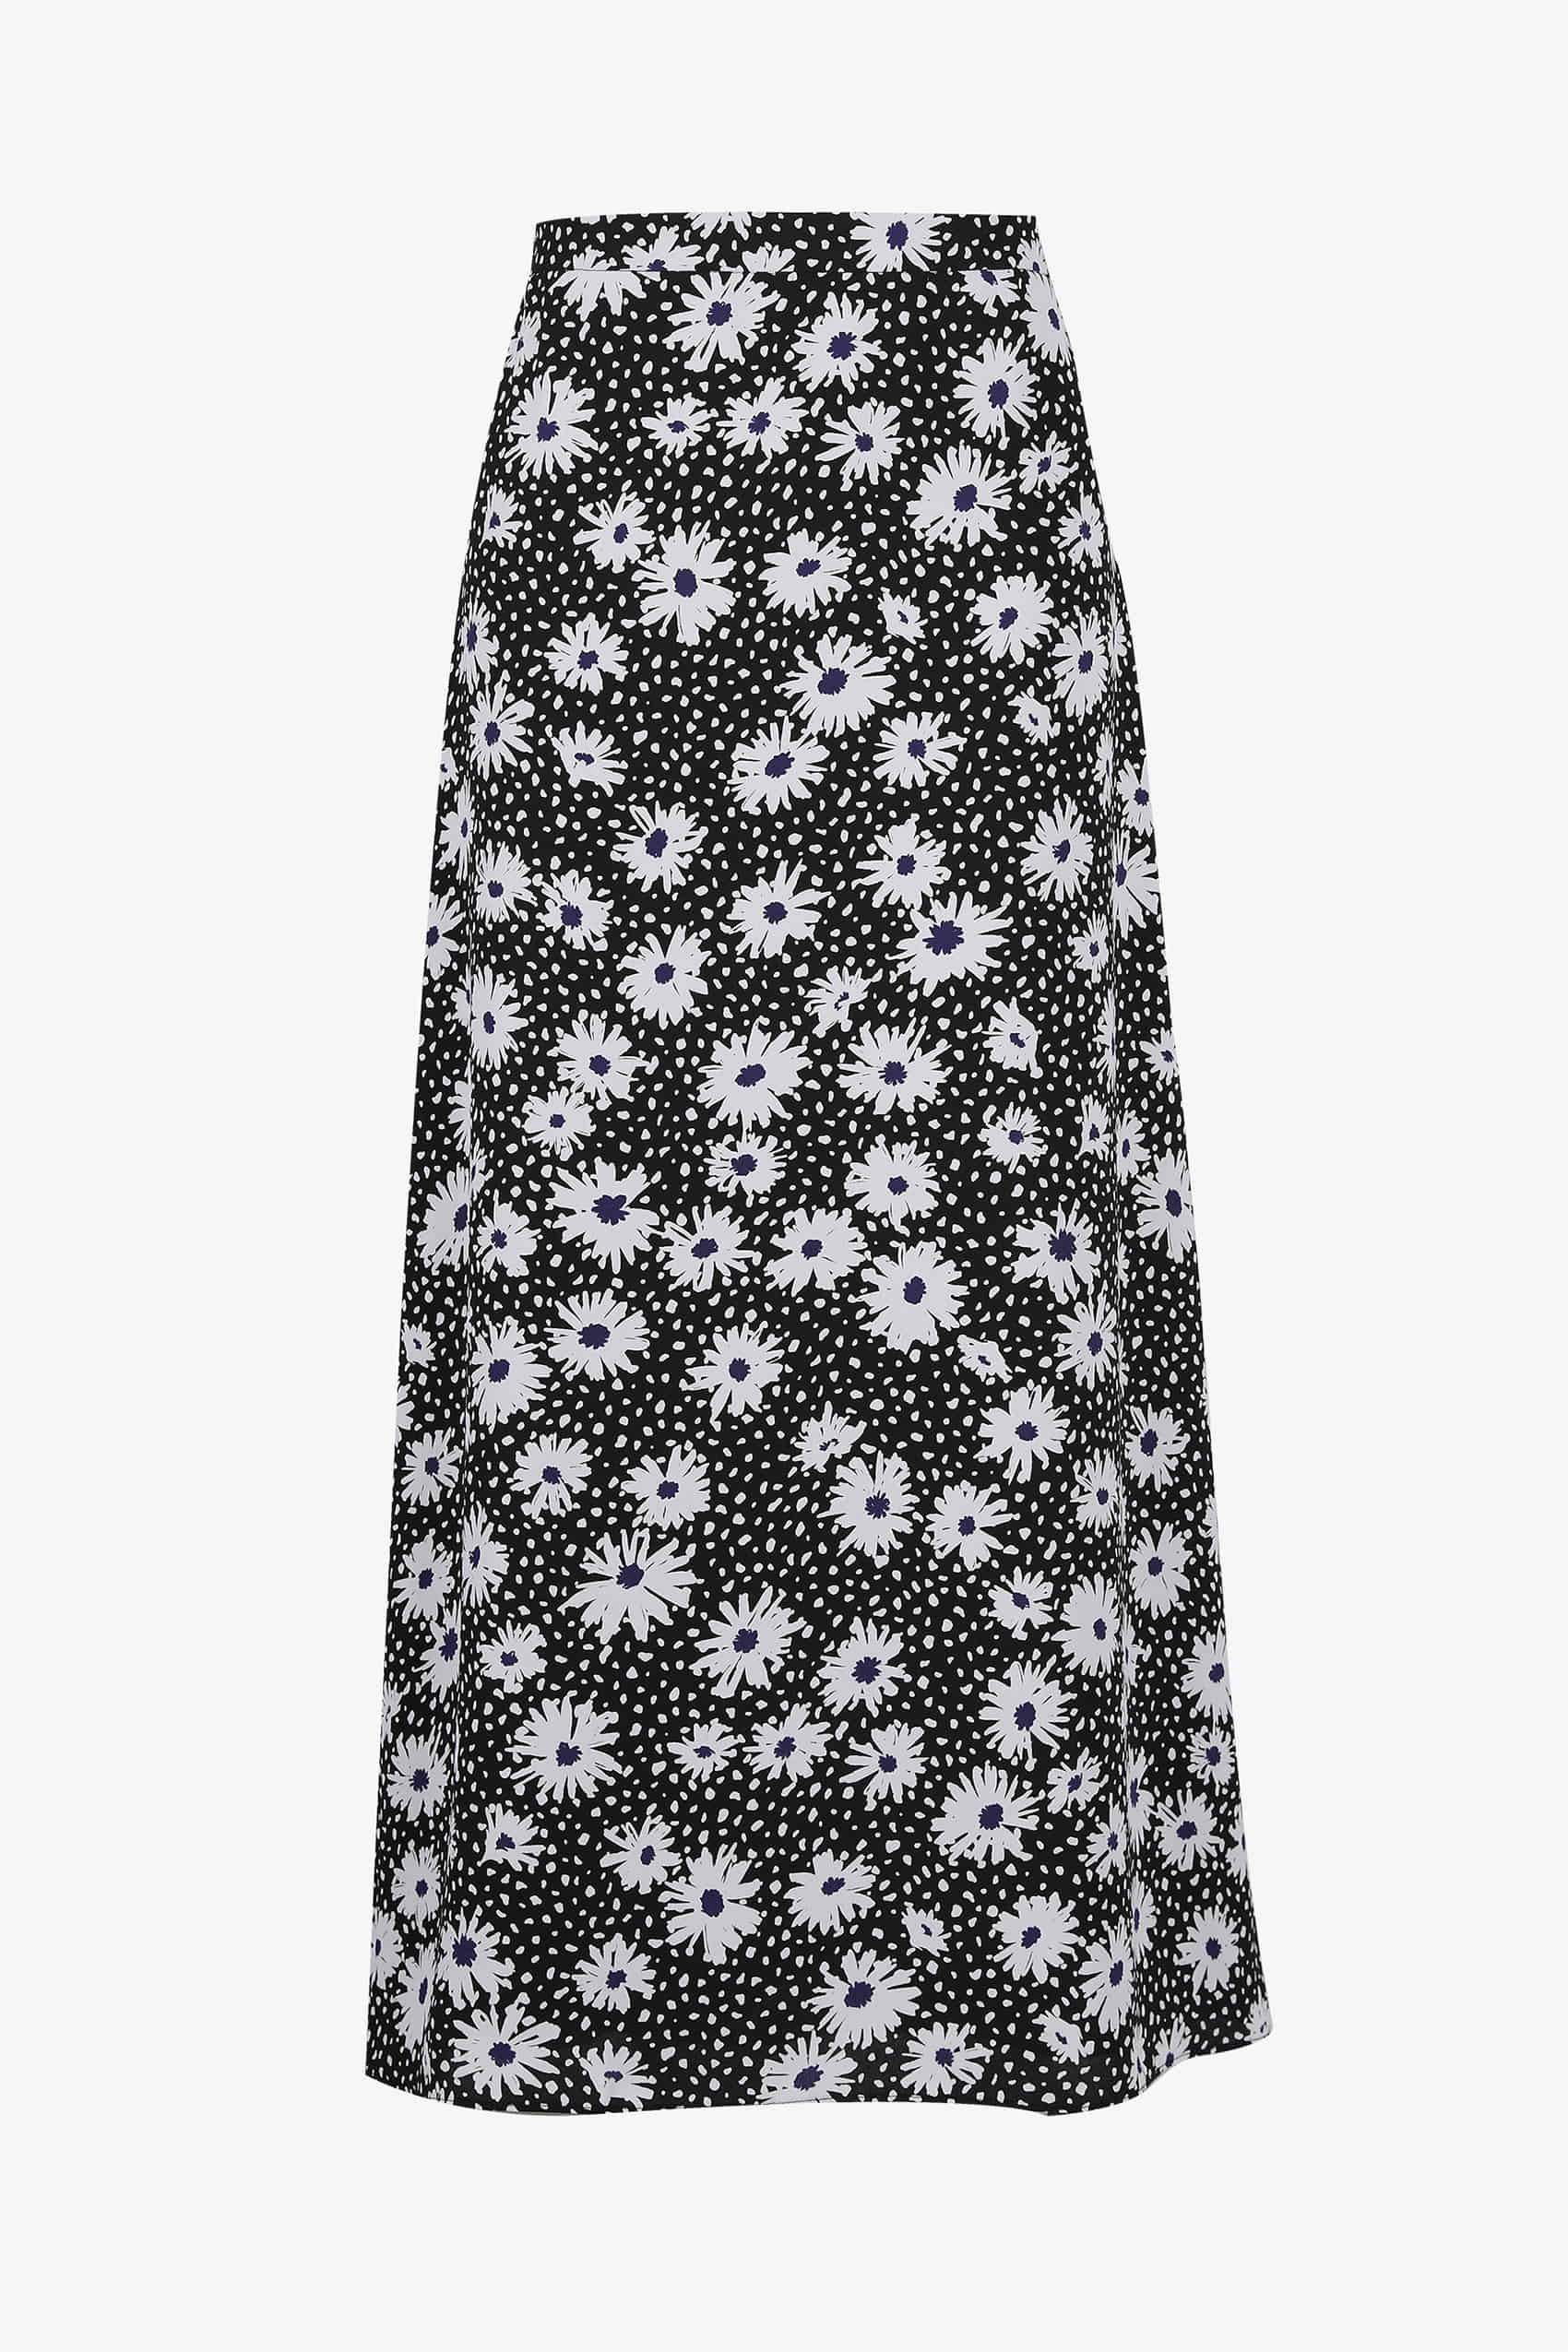 HIGH QUALITY LINE - Floral Print Skirt (Fabric by UNI TEXITLE, Made in JAPAN)